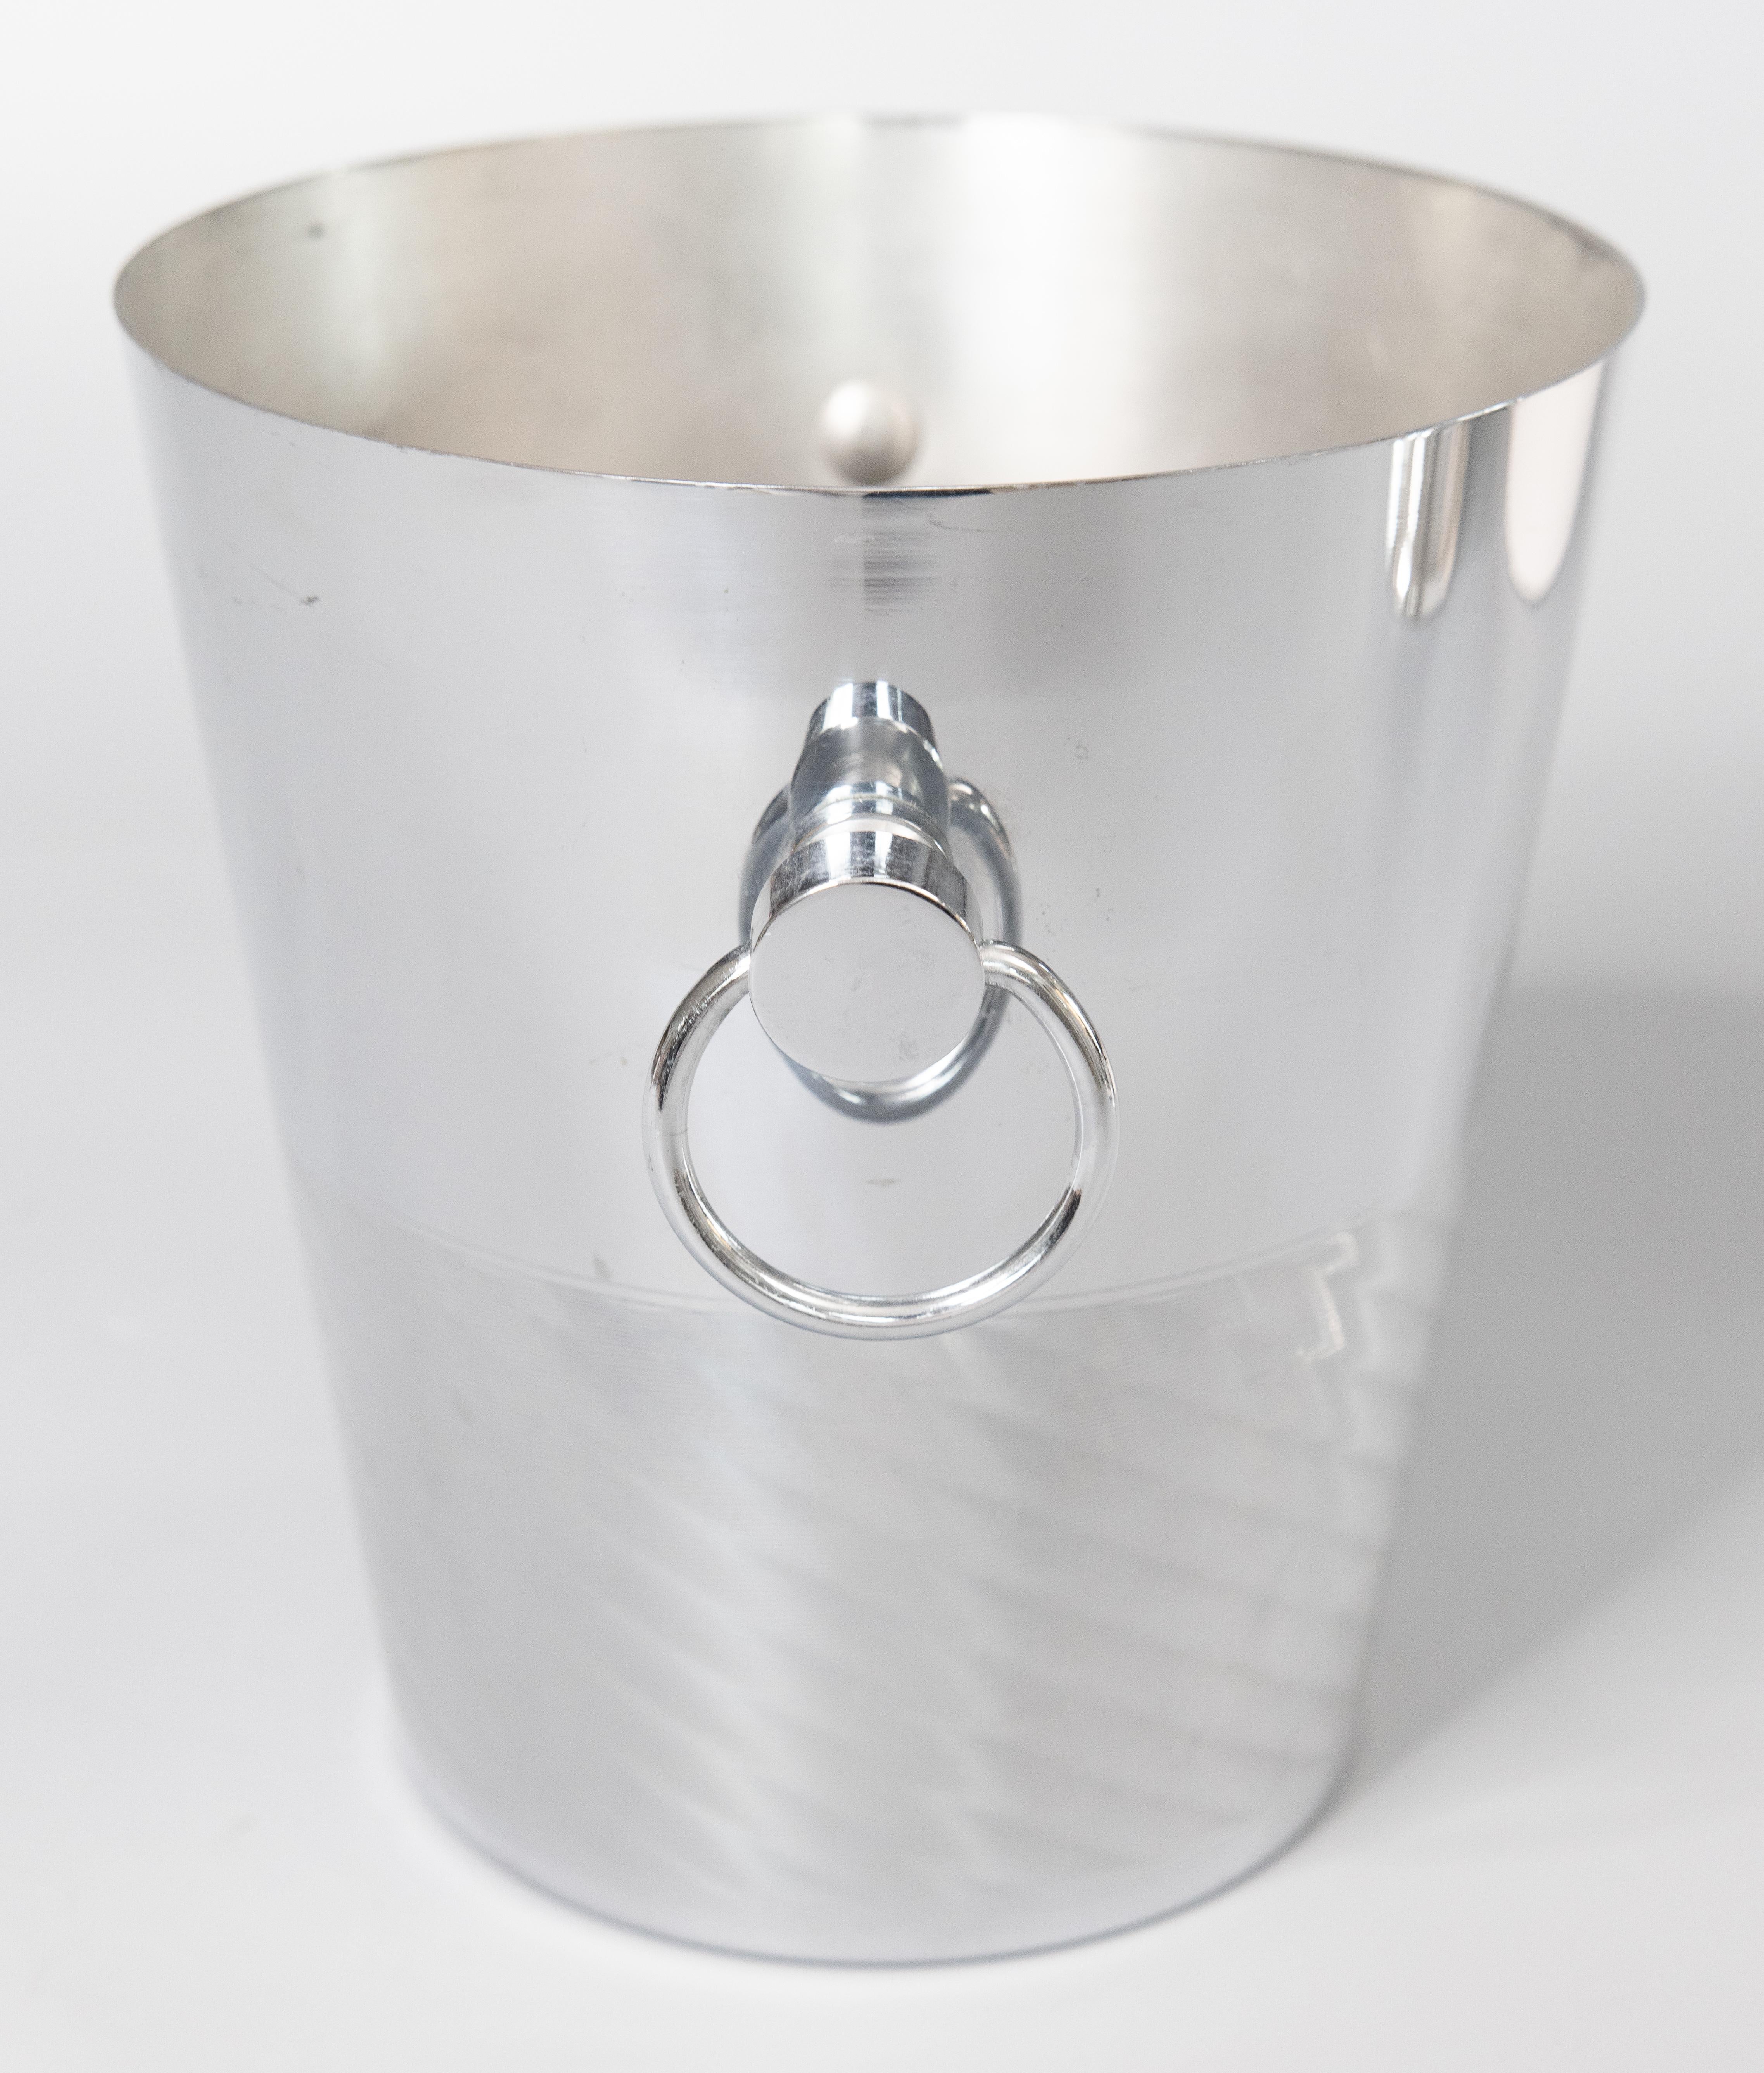 A fabulous Mid-20th Century French chrome plated champagne bucket or wine cooler, made by André Leroy in France, circa 1960. Maker's mark on reverse. This stylish ice bucket is well made and heavy with a sleek design, perfect for the modern